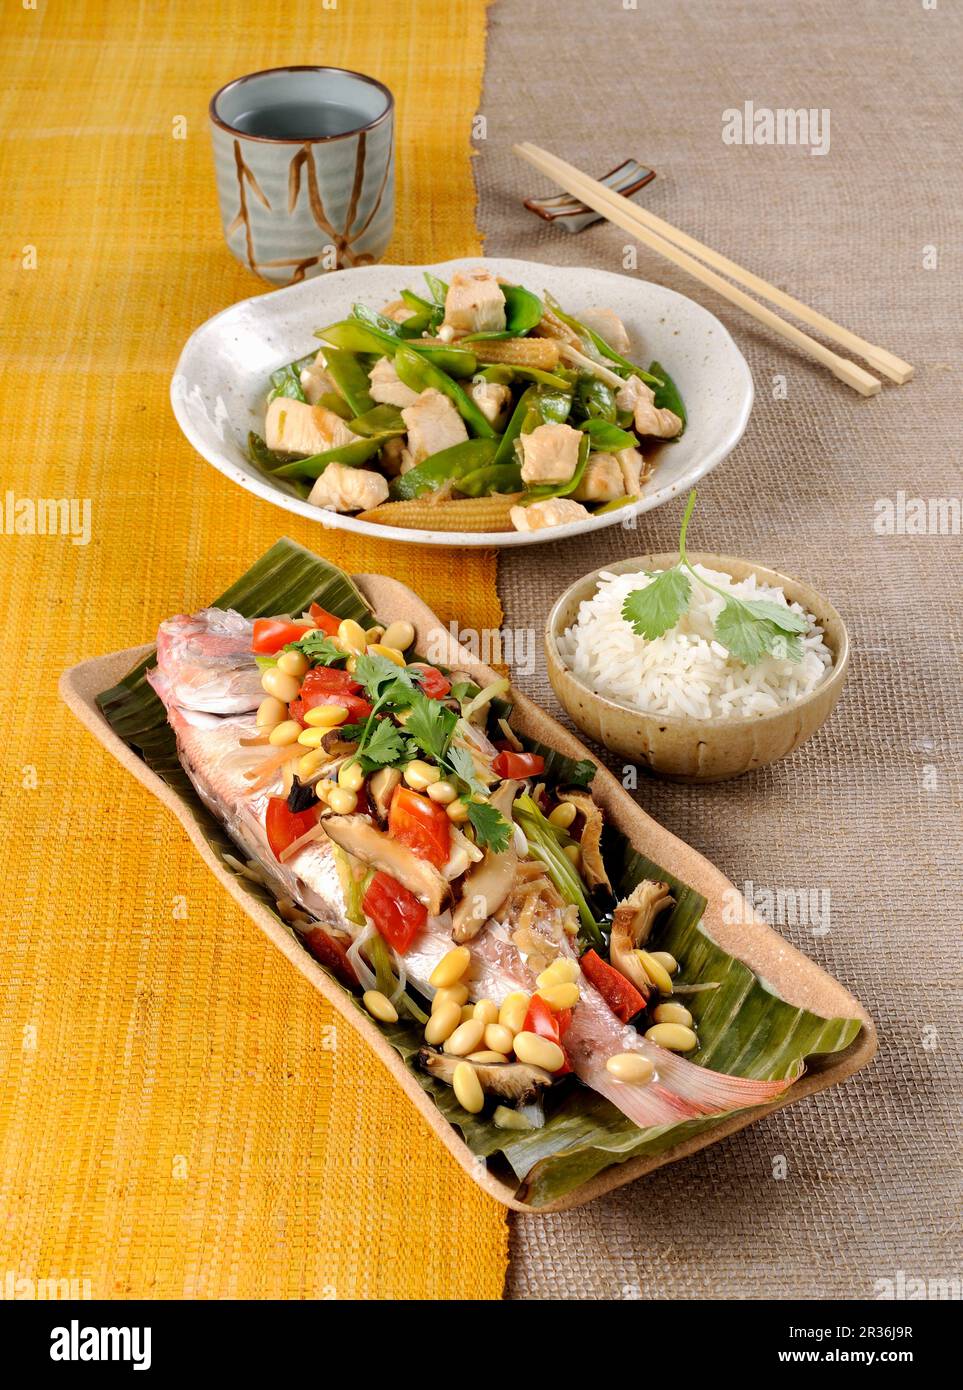 Steamed pandora in a banana leaf, and stir-fried chicken with vegetables Stock Photo